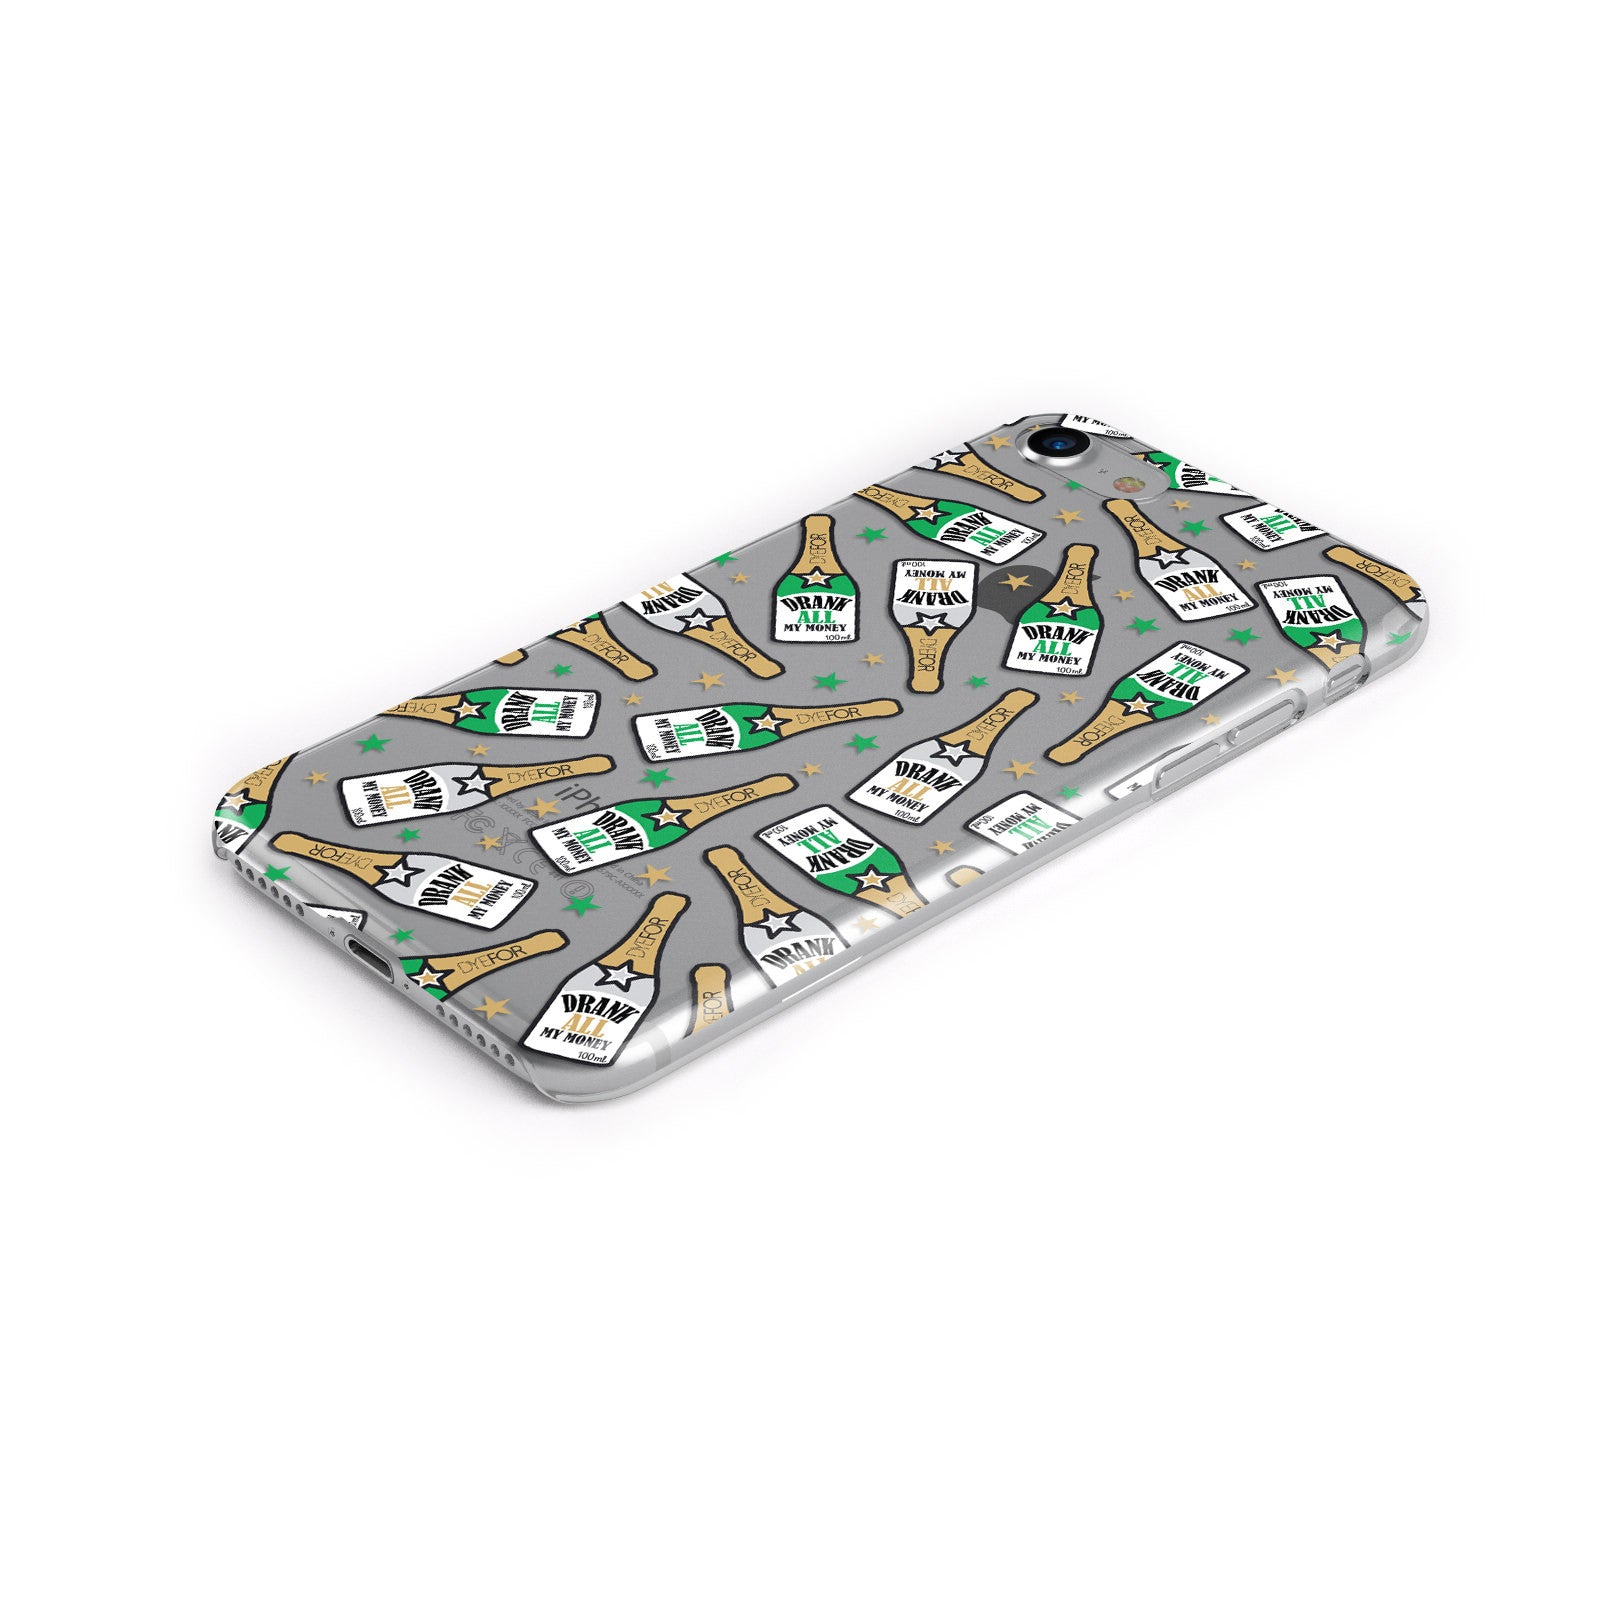 Drank All My Money Champagne Clear Apple iPhone Case Bottom Cutout